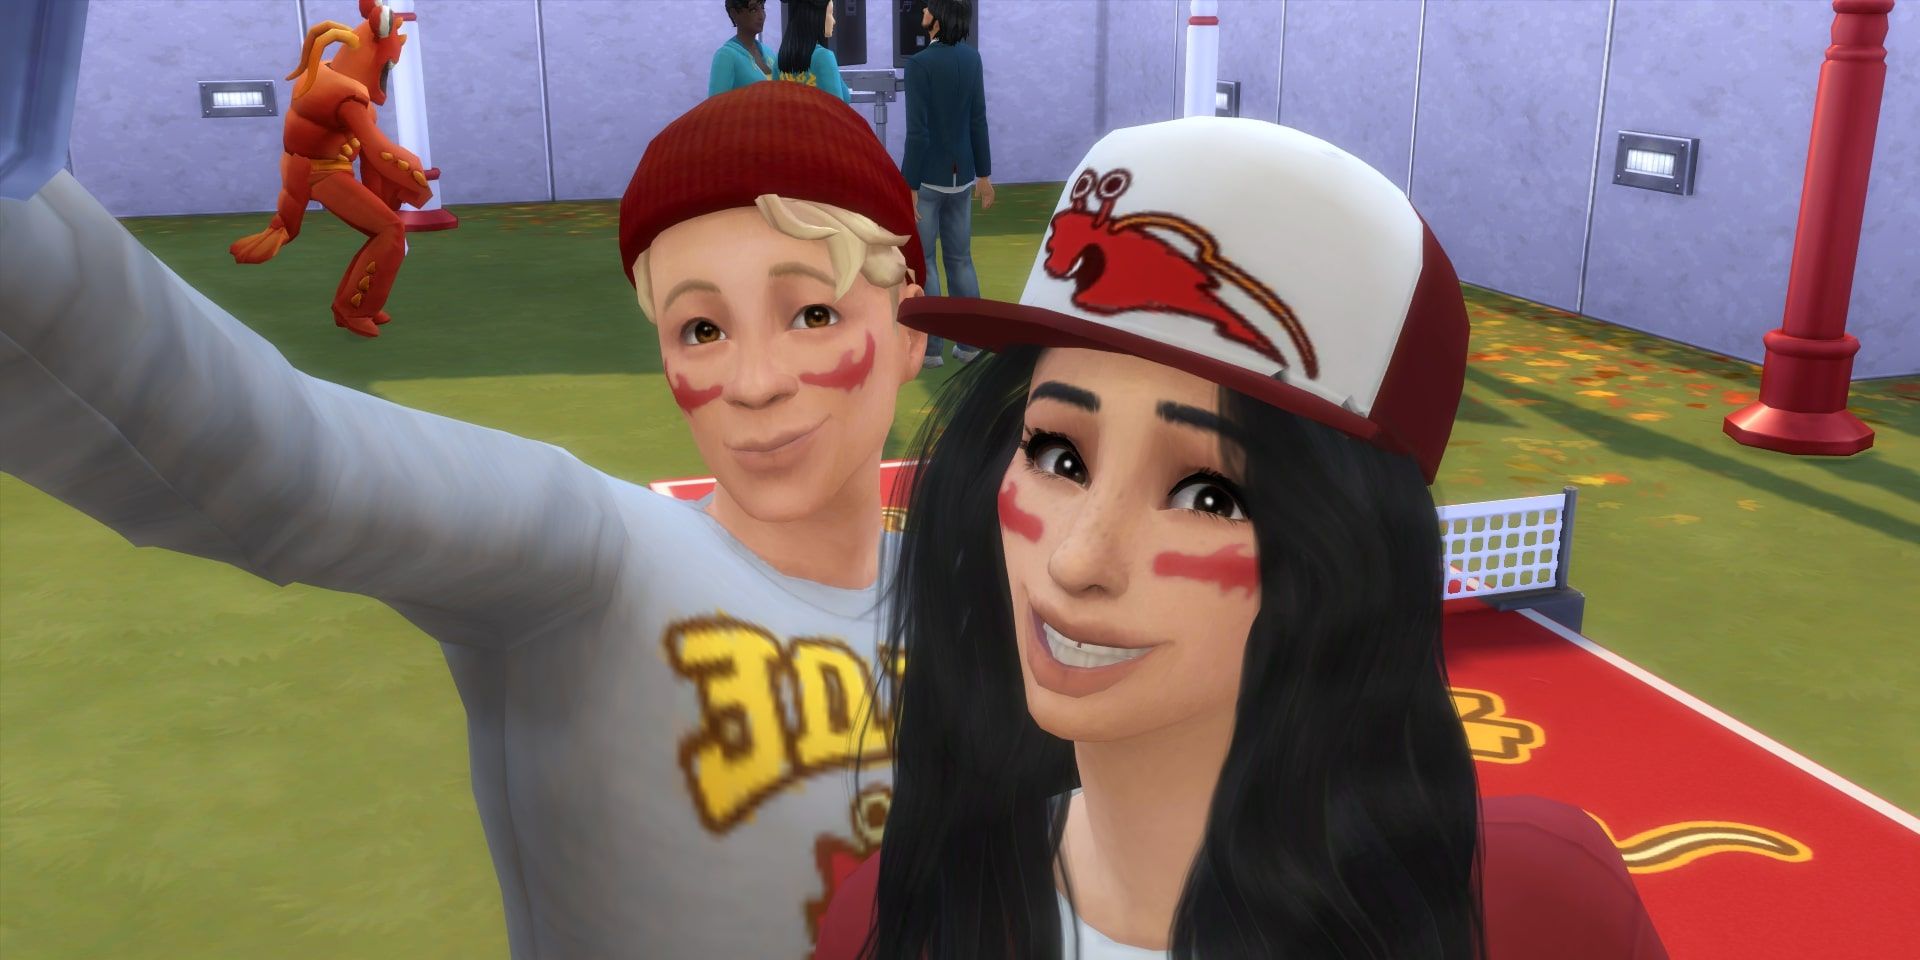 Sims are taking a selfie decked out in sports apparel for the big game holiday